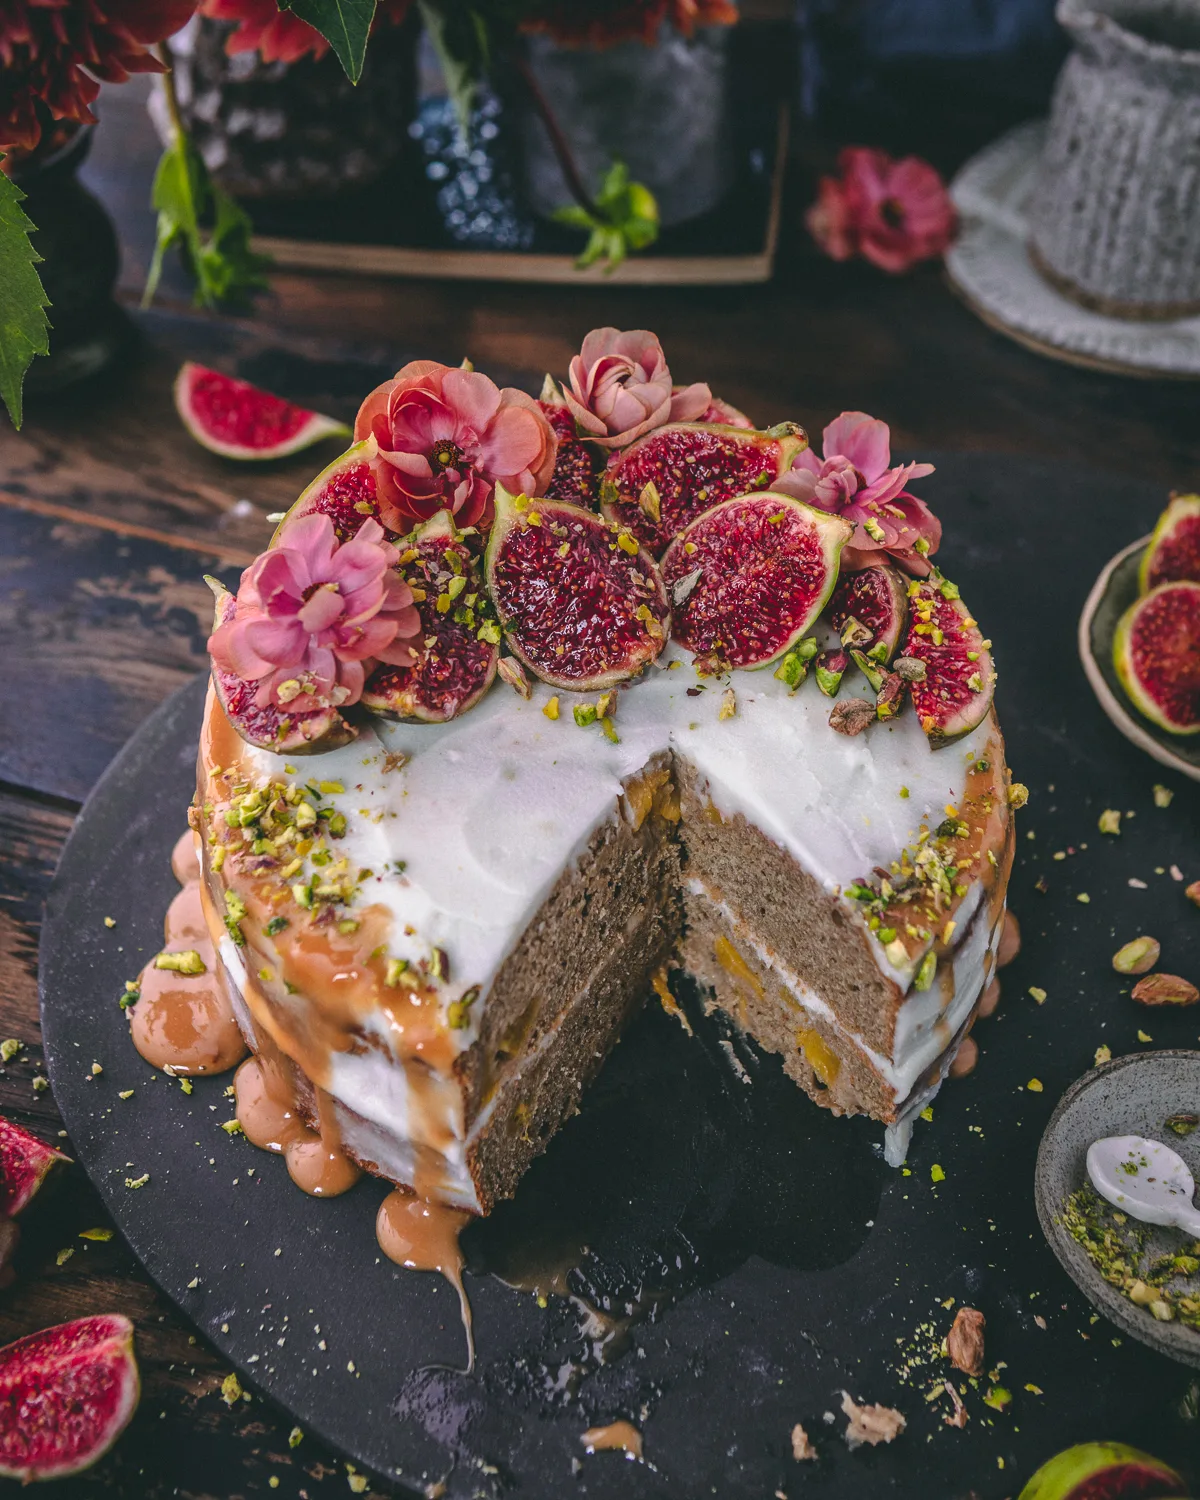 Peach-and-fig-cake-with-crushed-pistachio and-passionfruit-drizzle